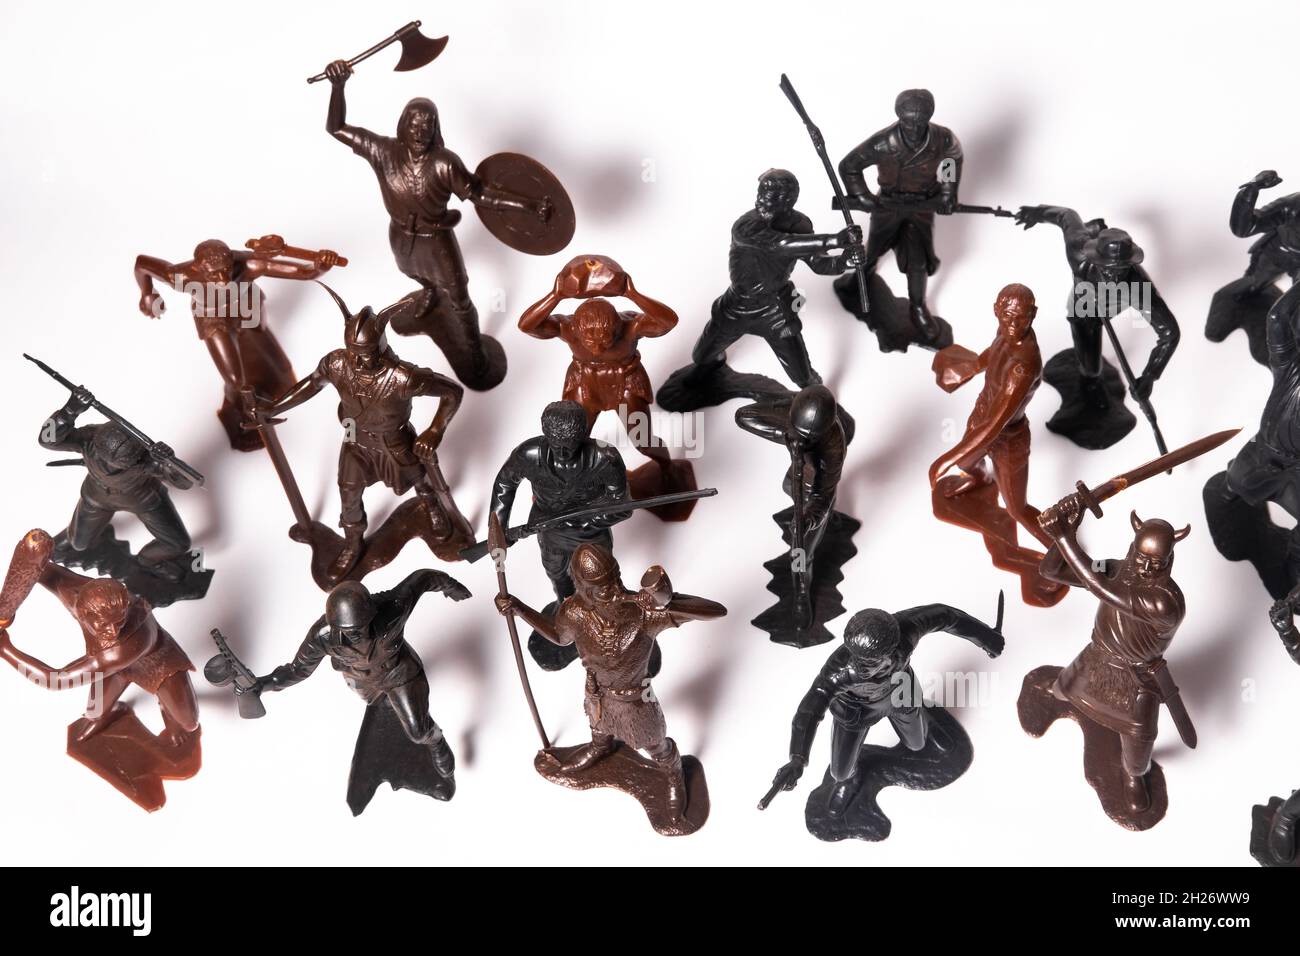 A set of different toy figures of soldiers on a white background Stock Photo